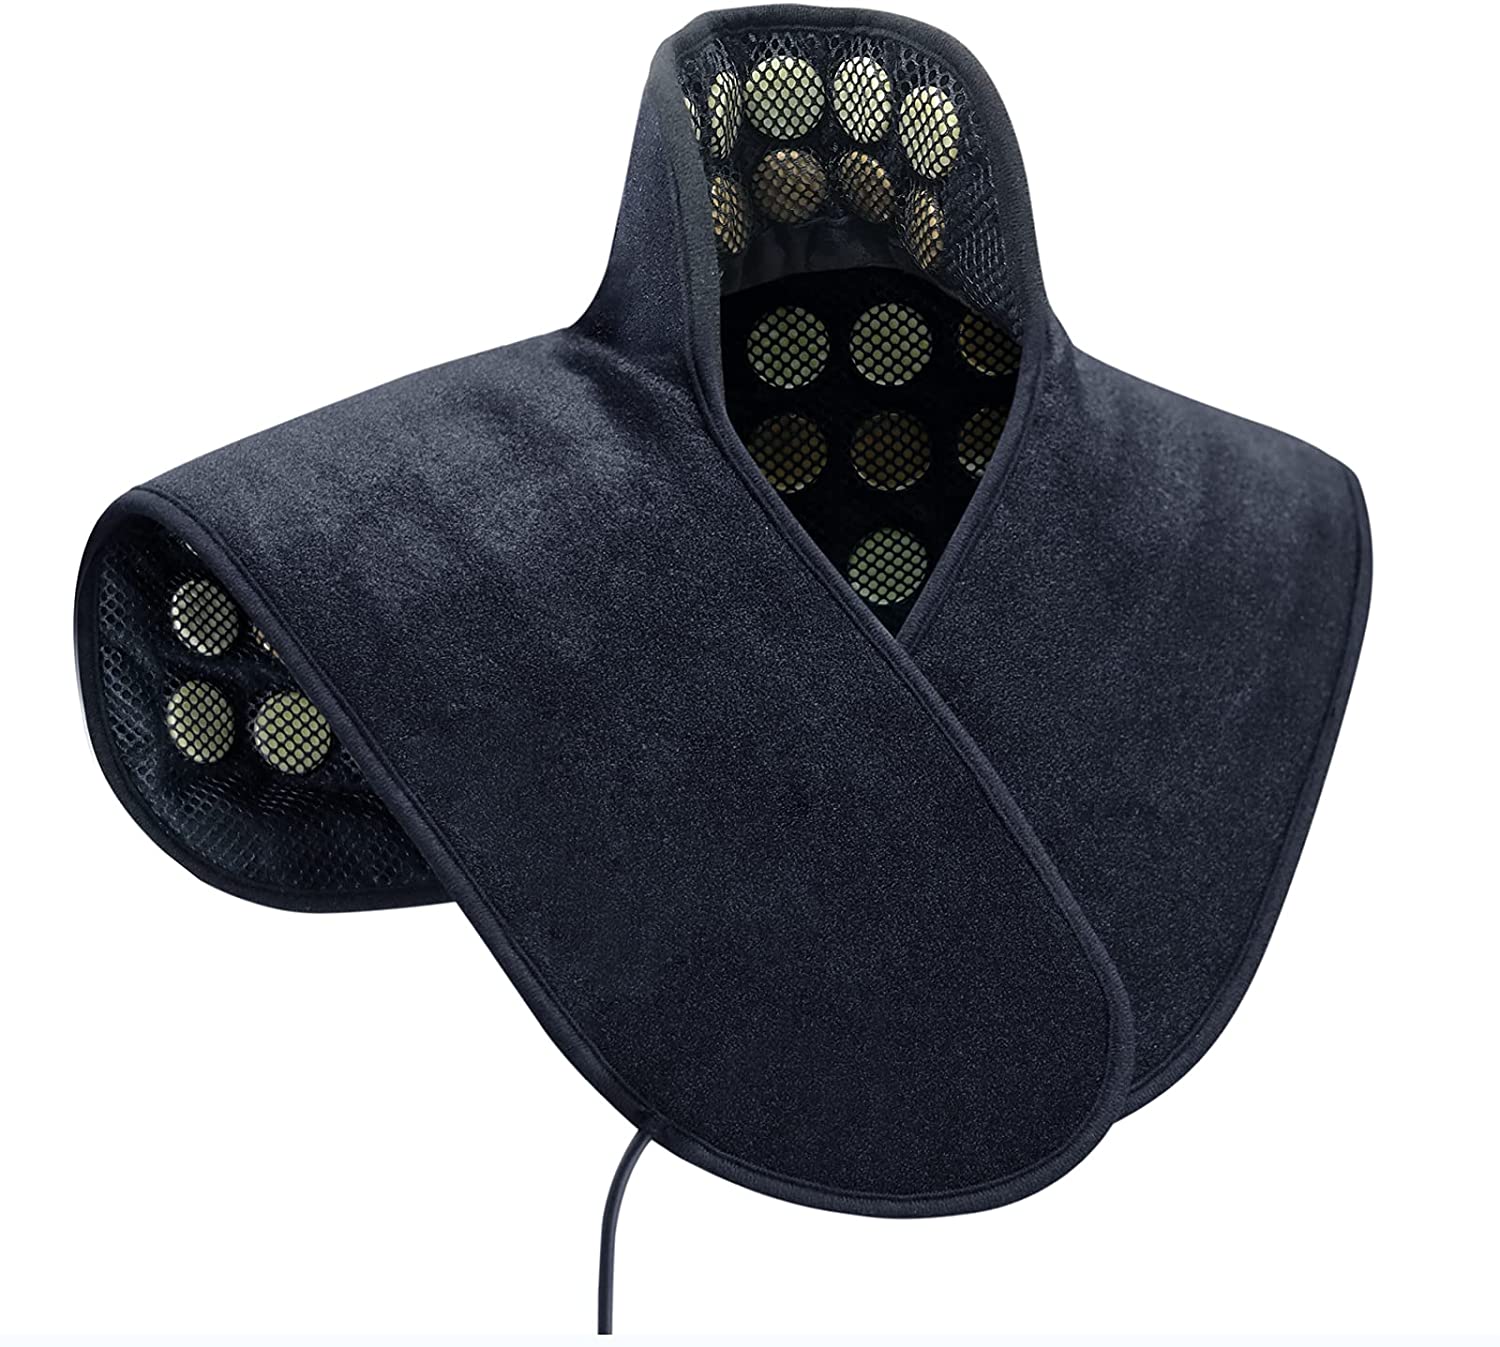 Advantages of Selecting Infrared Heating Pad for Neck 1